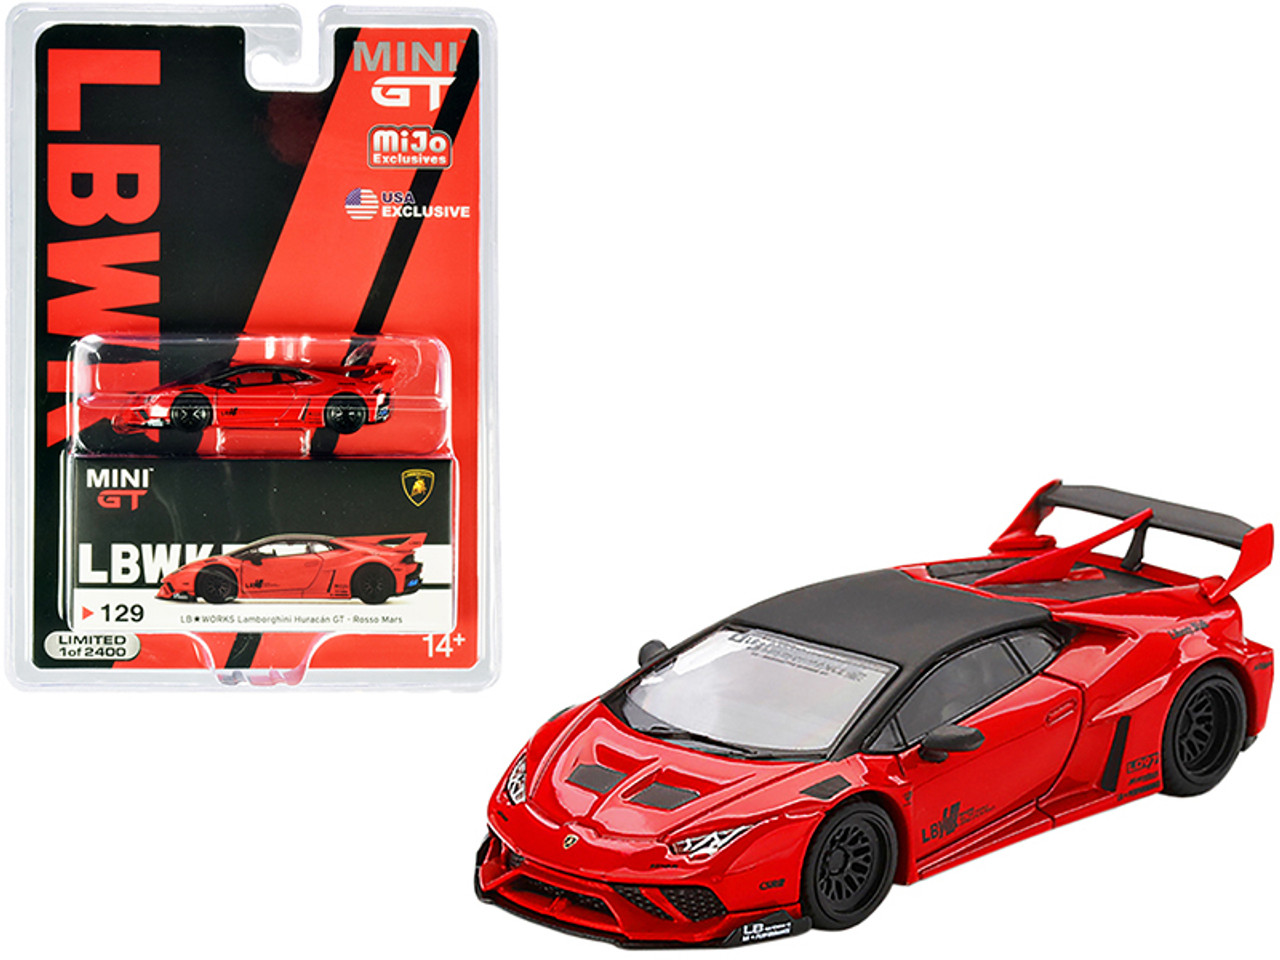 Lamborghini Huracan GT LB Works Rosso Mars Red with Black Top Limited Edition to 2400 pieces Worldwide 1/64 Diecast Model Car by True Scale Miniatures